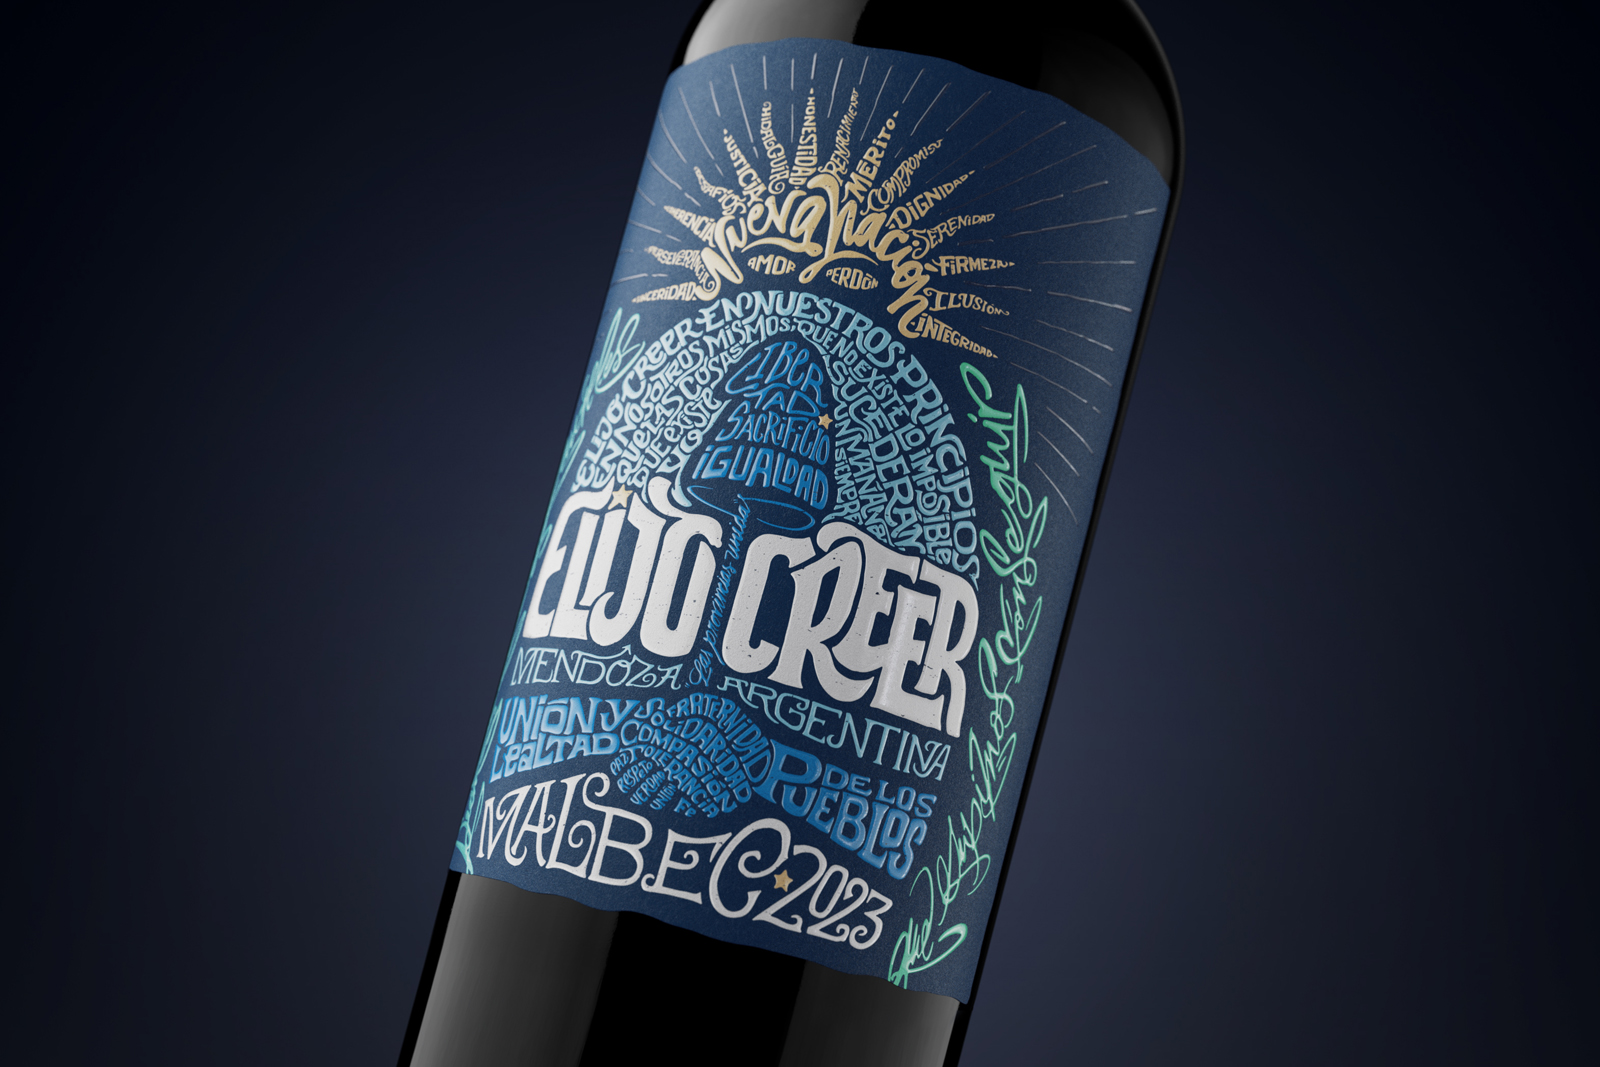 Elijo Creer: An Uplifting Wine Label Design Inspired on the Qatar 2022 World Cup